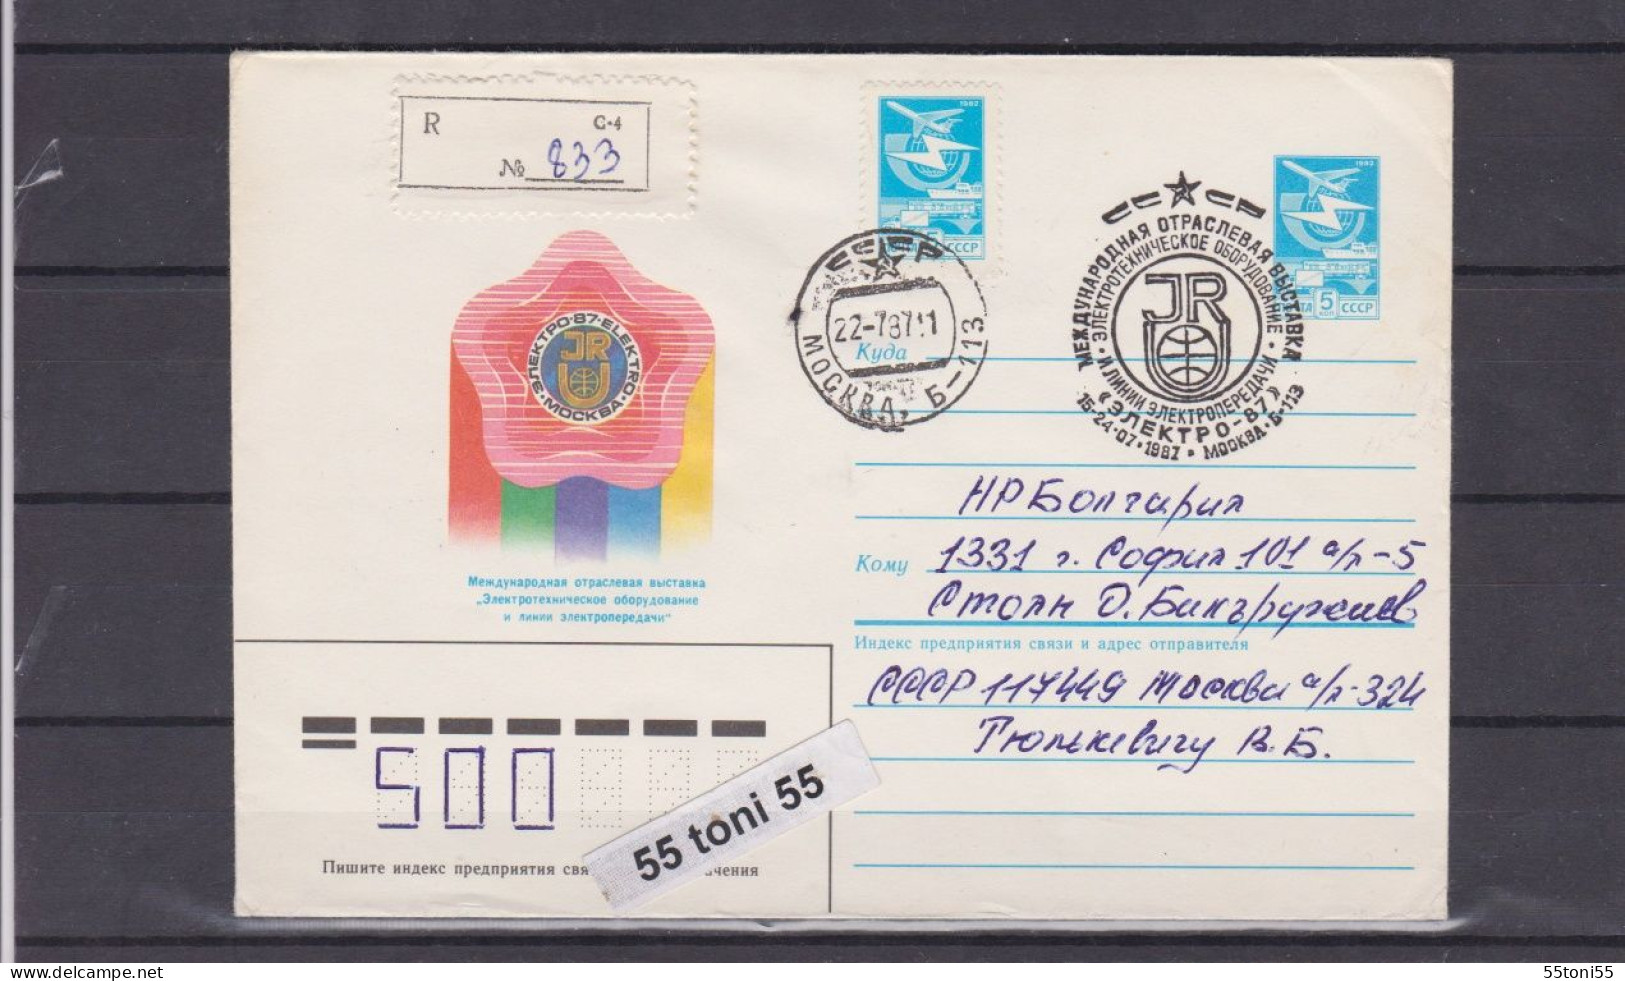 1987  Electro-87 Inter. Exhibition Of Electrotechnical Equipment  P.Stationery + Special Cancel USSR P.Stationery Travel - Electricity